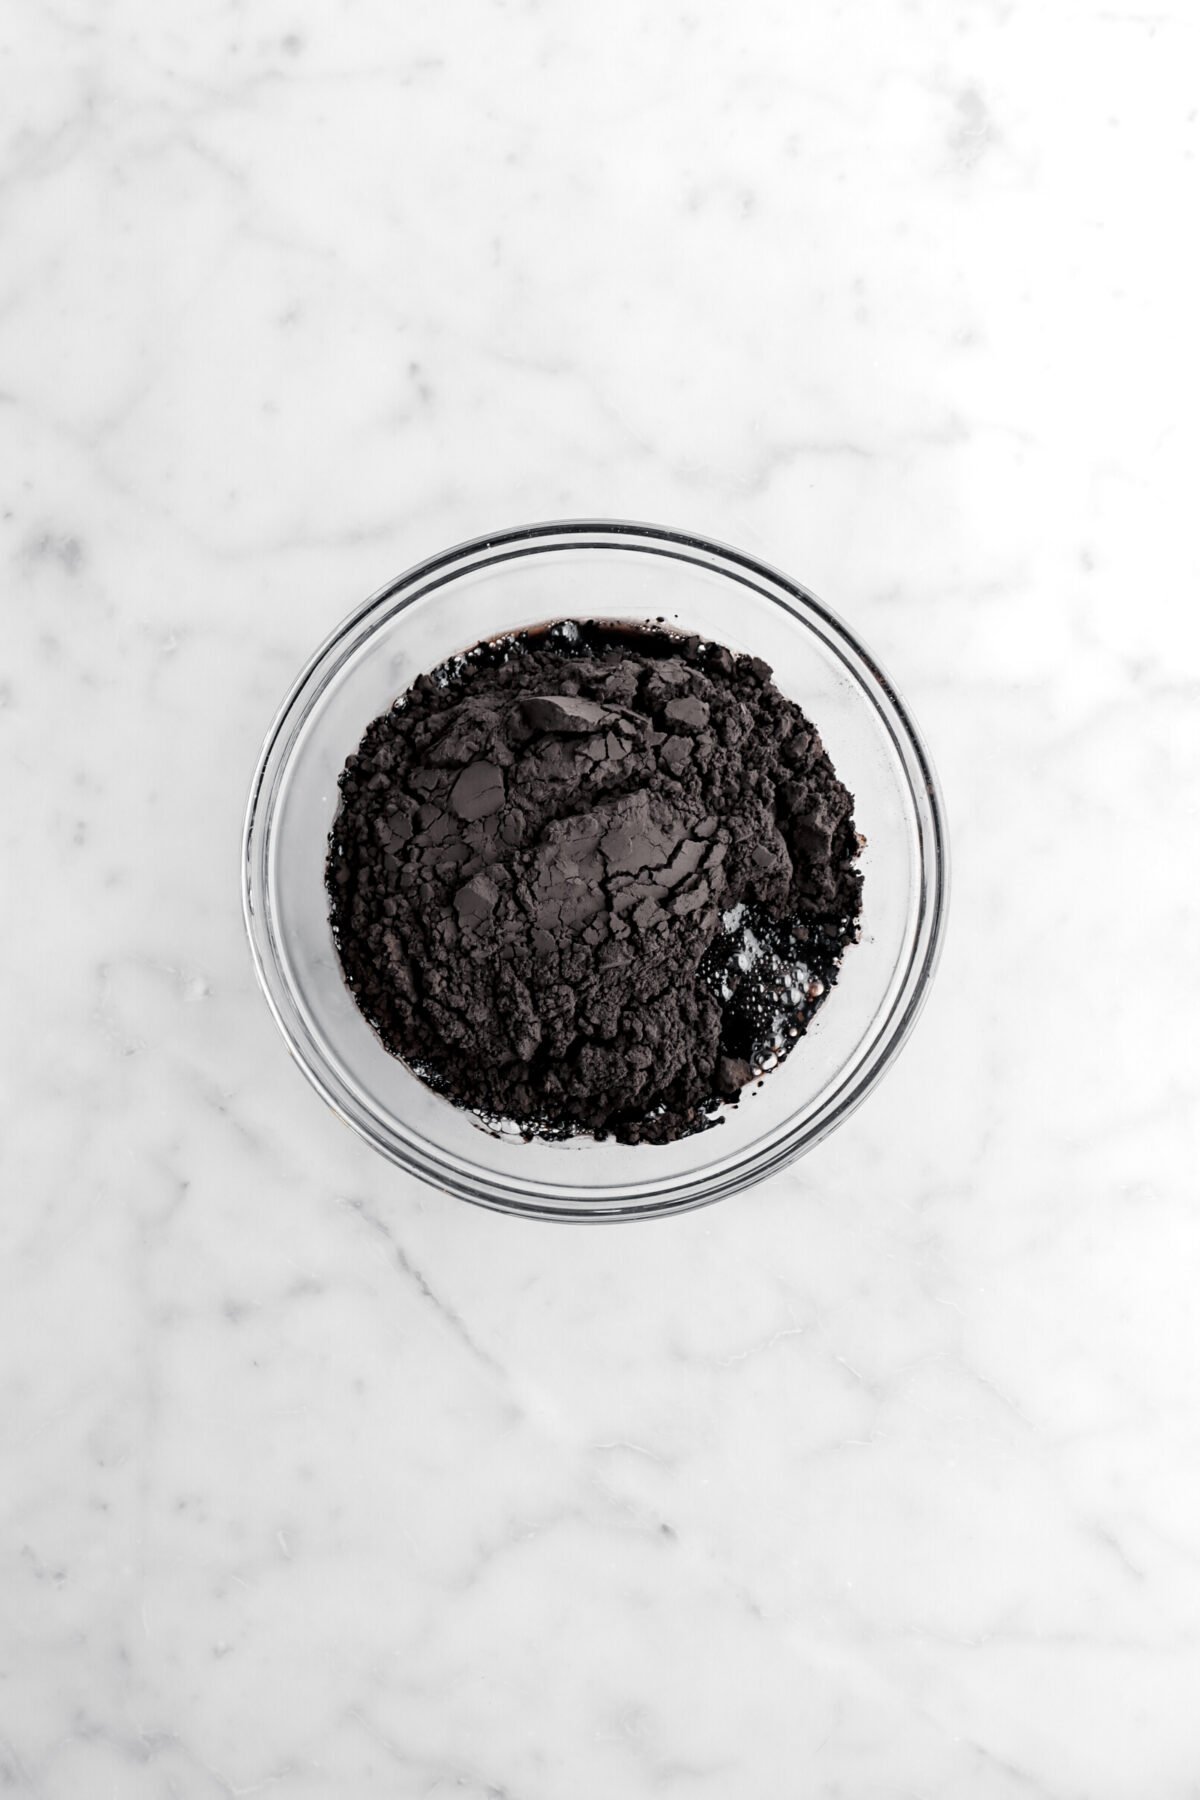 black cocoa powder and water in glass bowl.